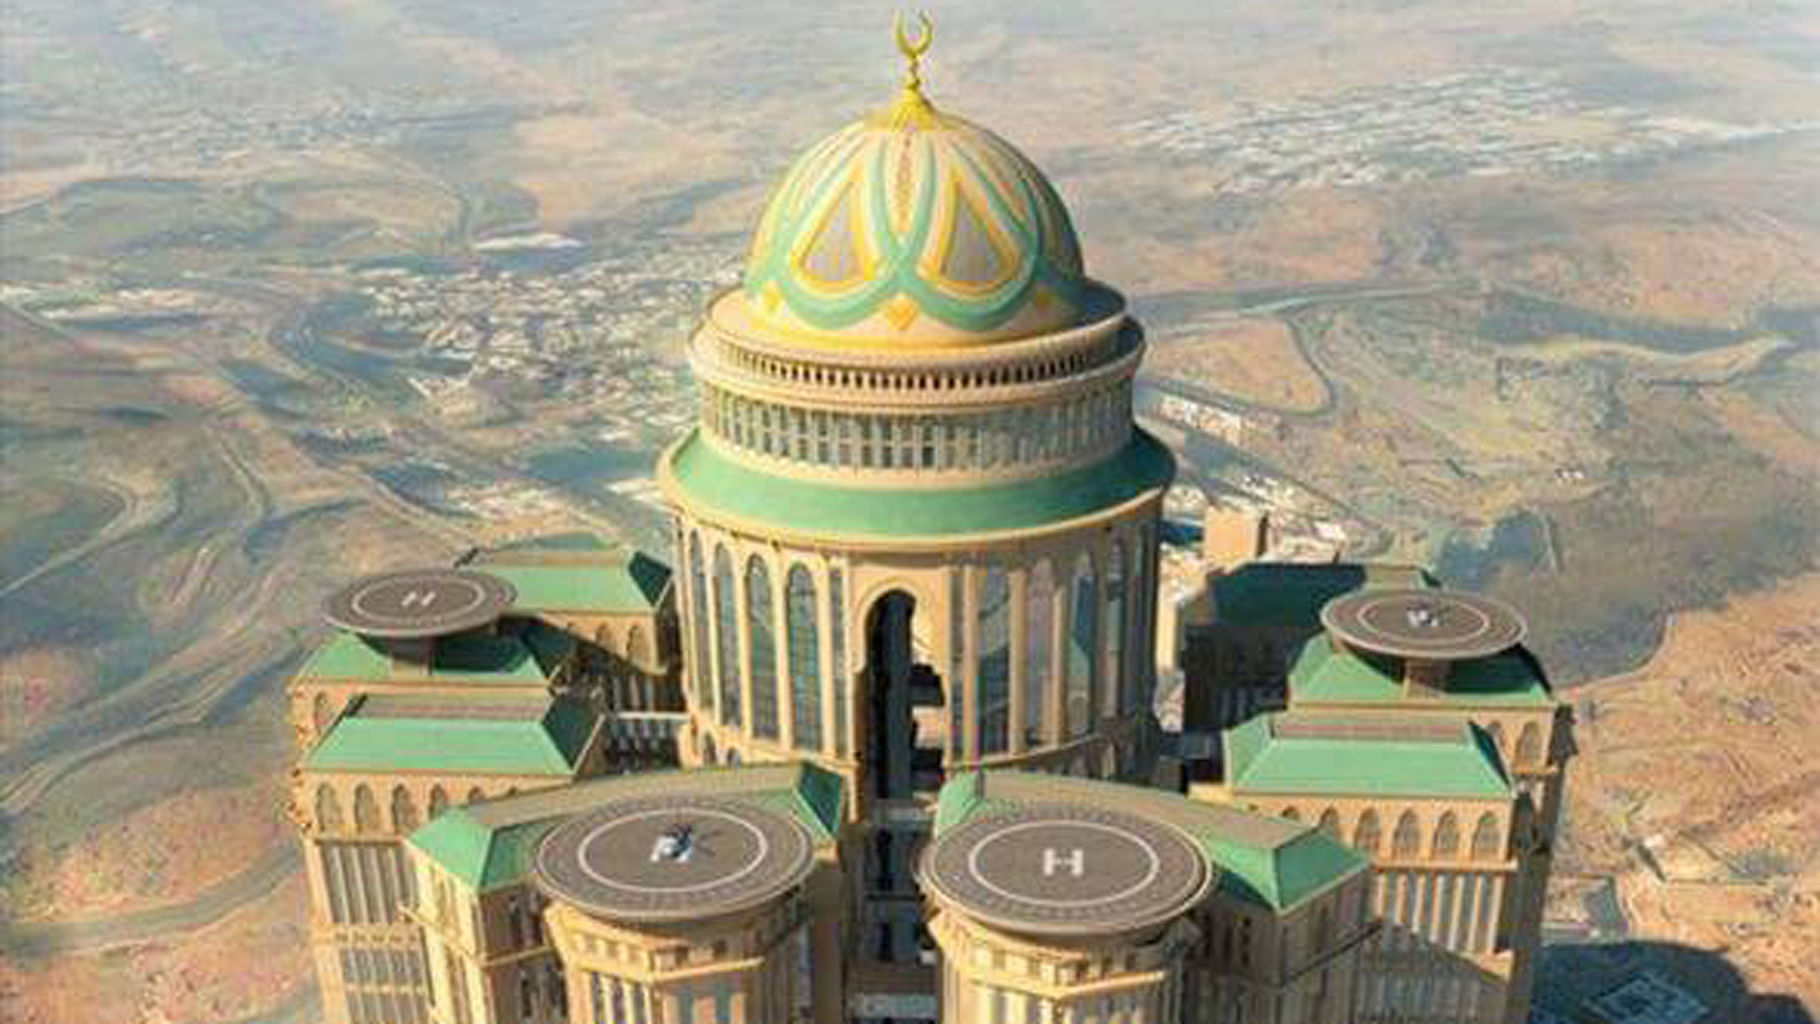 

The Abraj Kudai, located in Mecca, Saudi Arabia is going to be the world’s largest hotel. (Photo Courtesy: Facebook/ <a href="https://www.facebook.com/zerseyindia/">Zersey</a>)